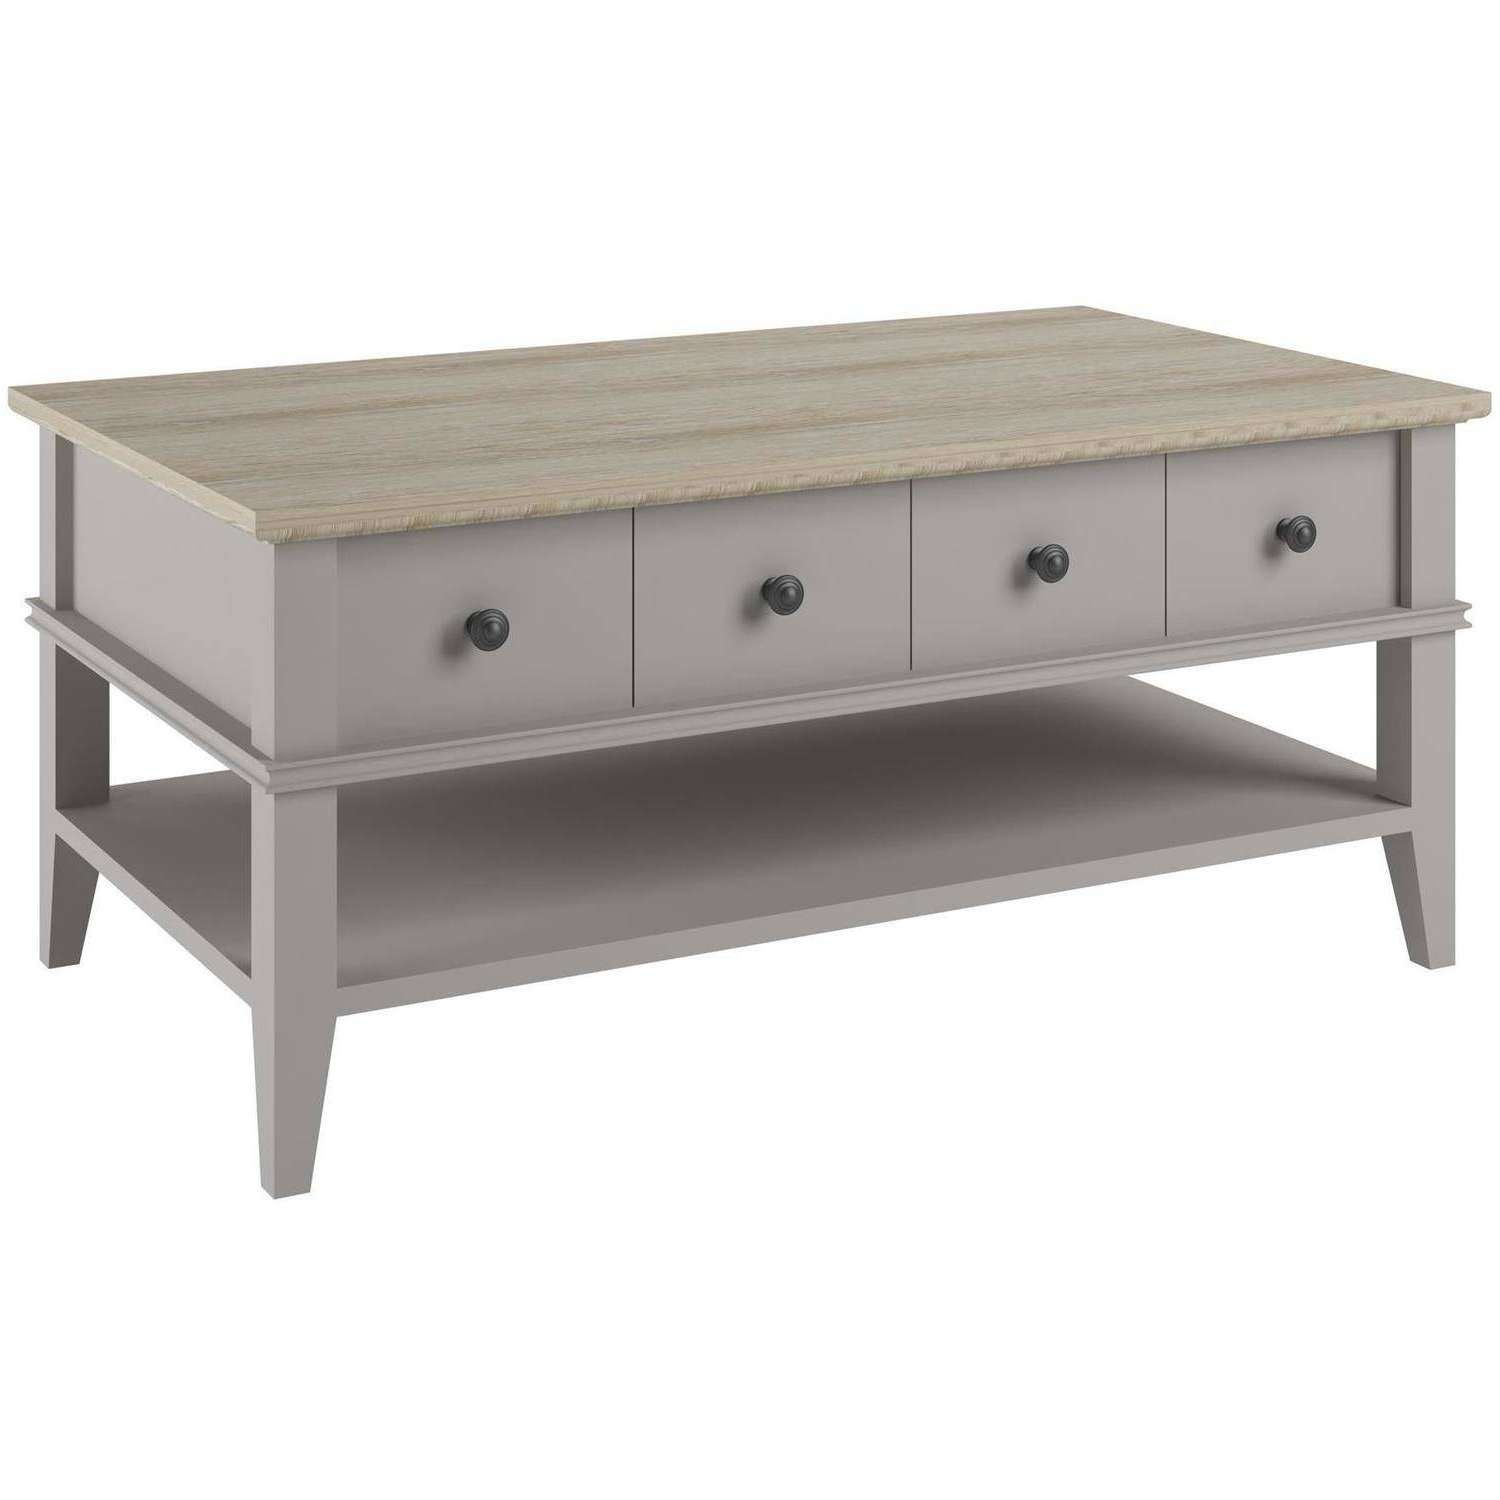 Ameriwood Home Newport Coffee Table, Light Gray/light Brown In Popular Gray Wood Coffee Tables (View 15 of 20)